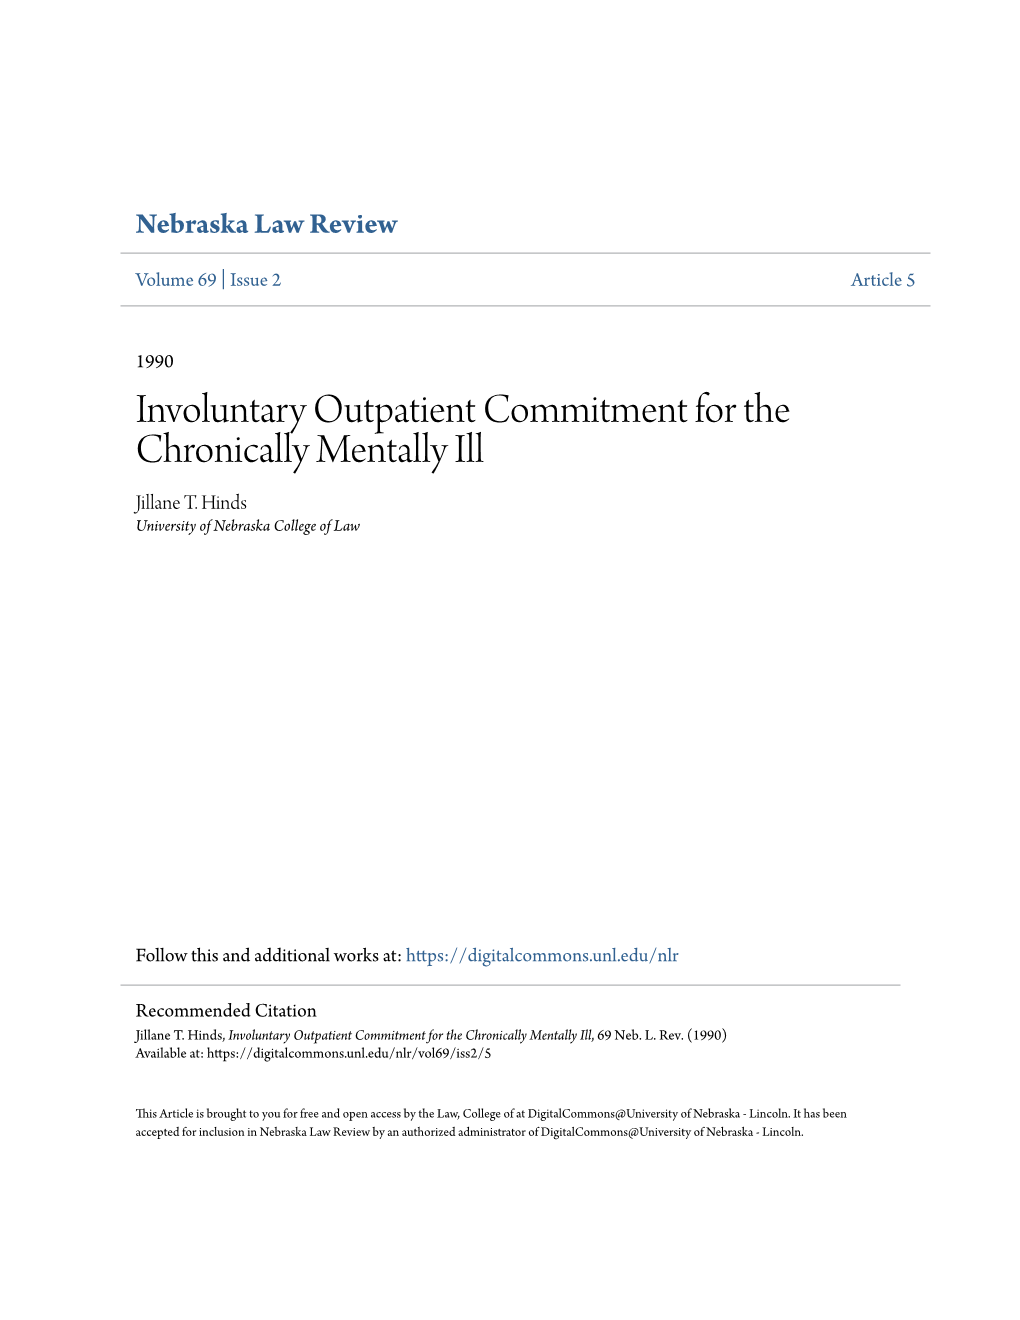 Involuntary Outpatient Commitment for the Chronically Mentally Ill Jillane T